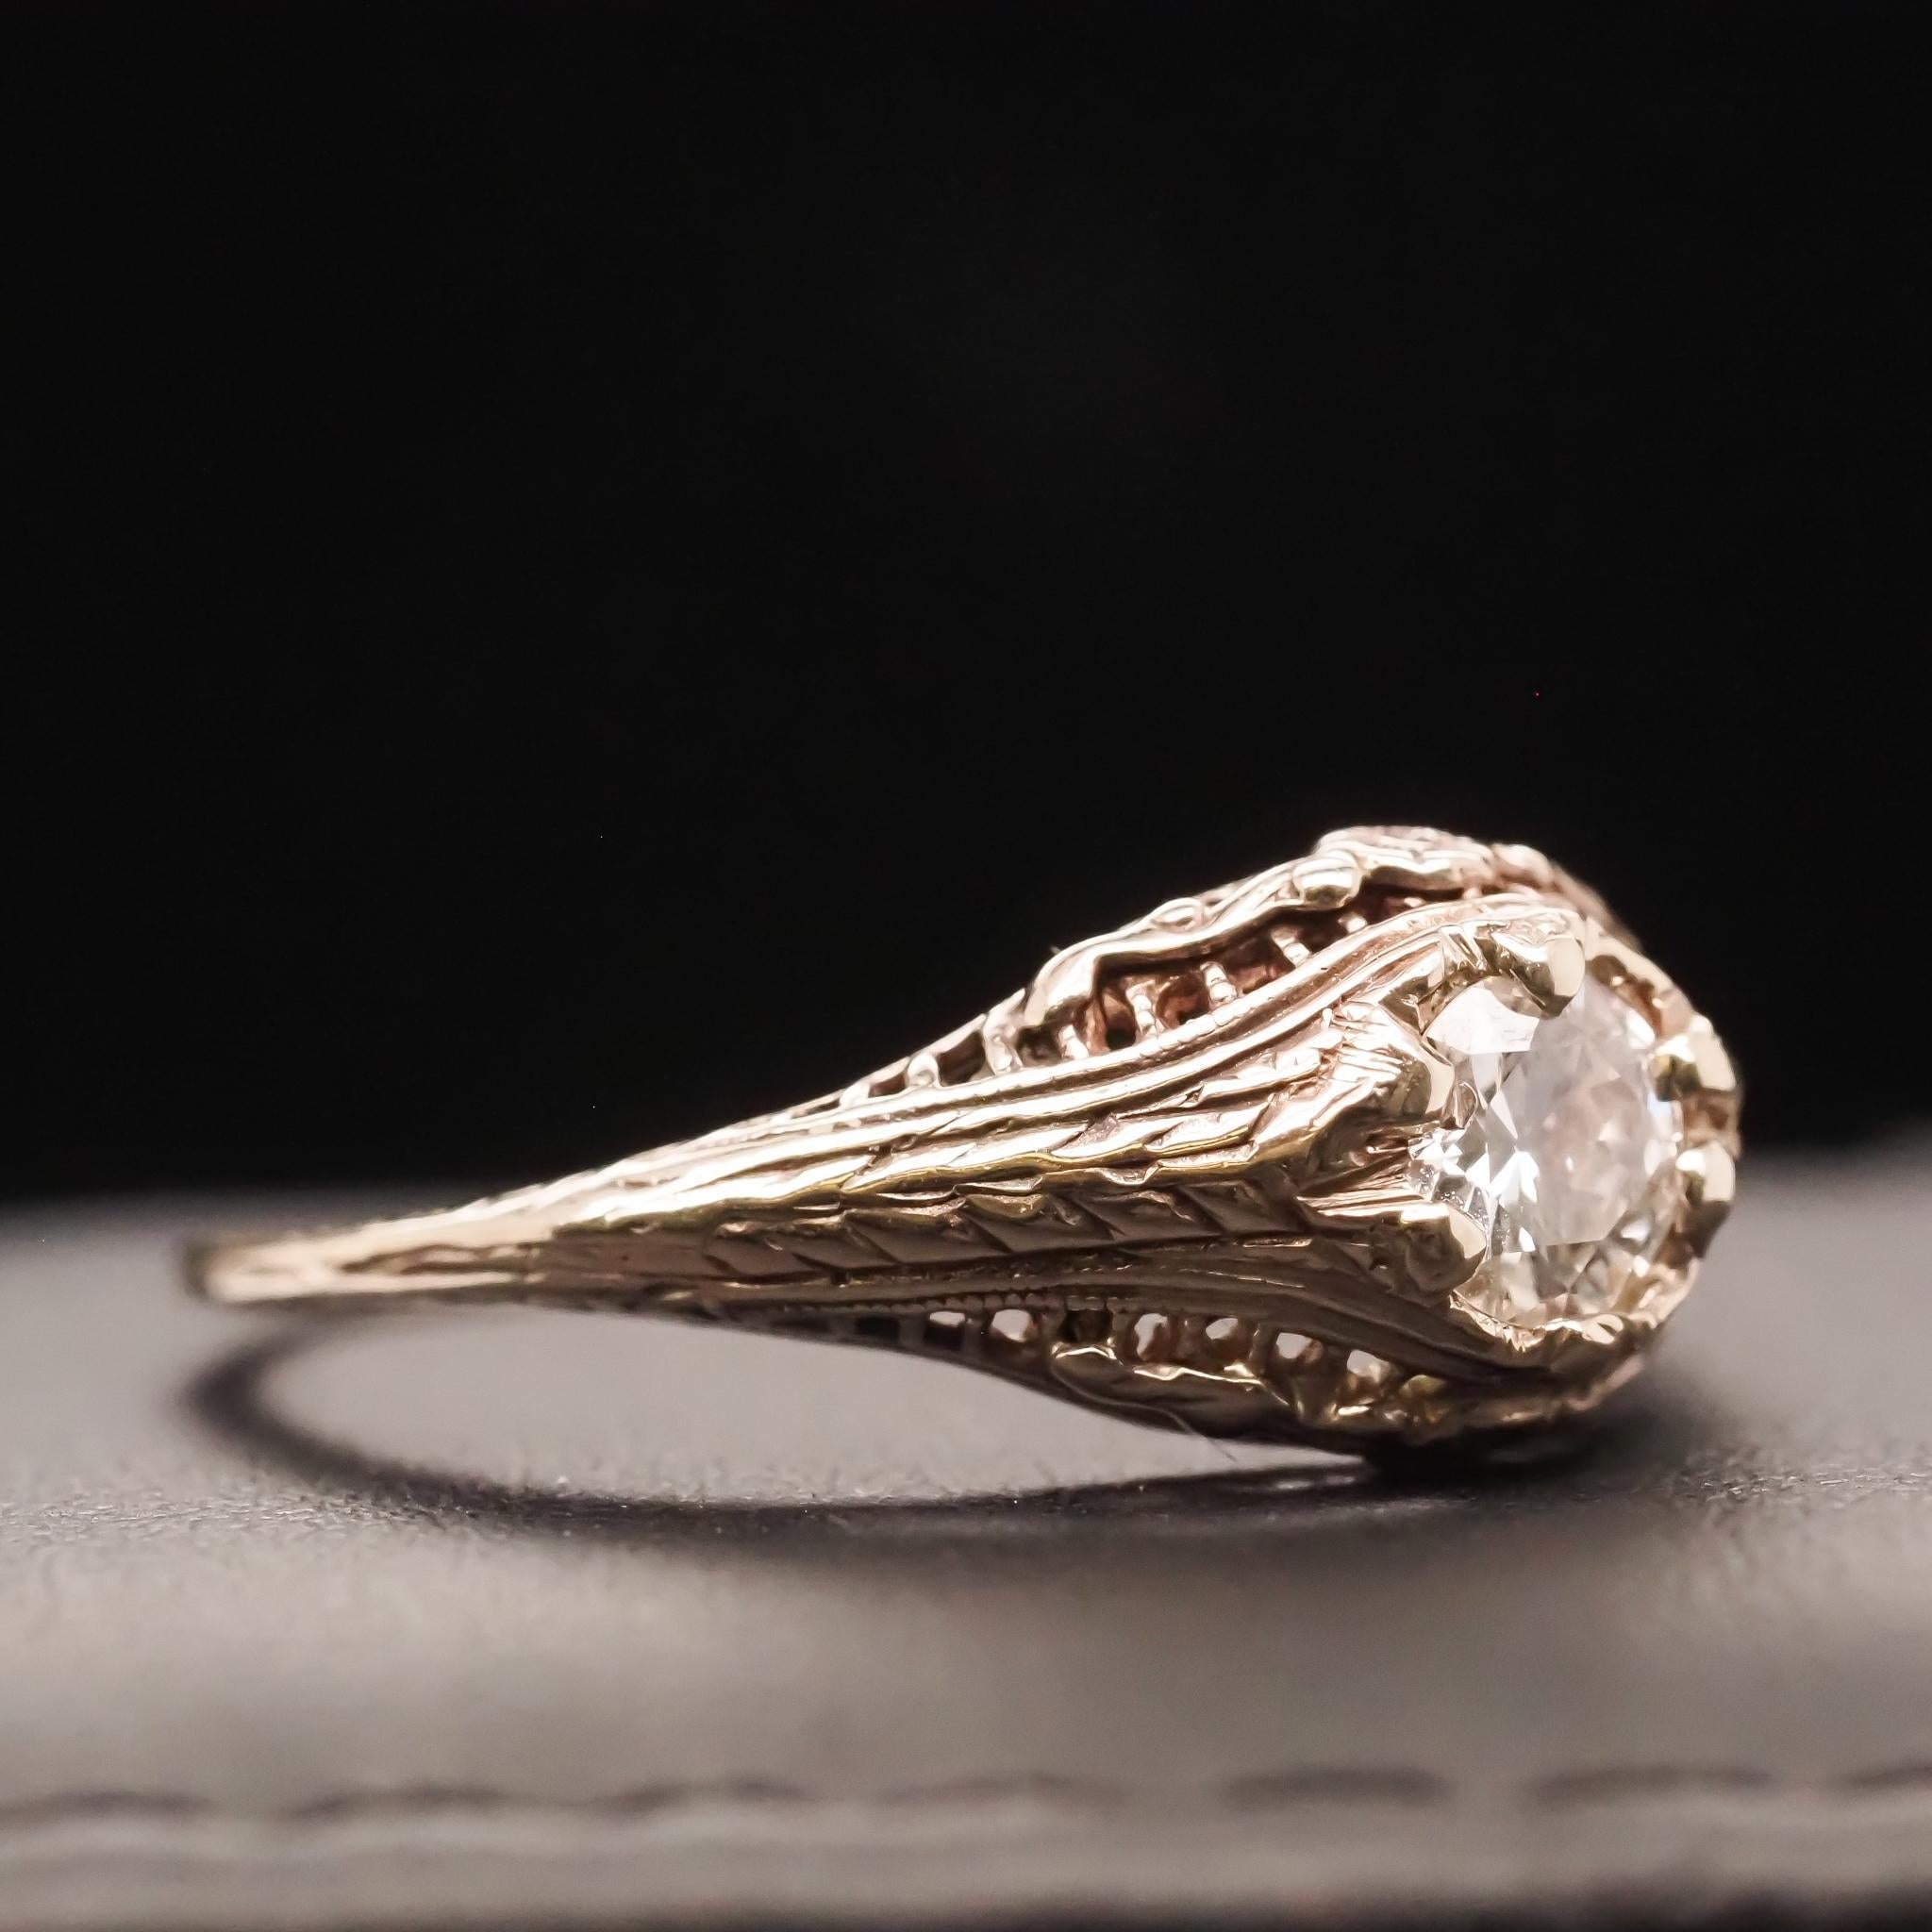 Year: 1940s
Item Details:
Ring Size: 7.75(Sizable)
Metal Type: [Hallmarked, and Tested]
Weight: 2.1grams
Diamond Details: .40ct, Old European Brilliant, H Color, VS Clarity
Band Width: 1.25mm
Condition: Excellent
Art Deco Era